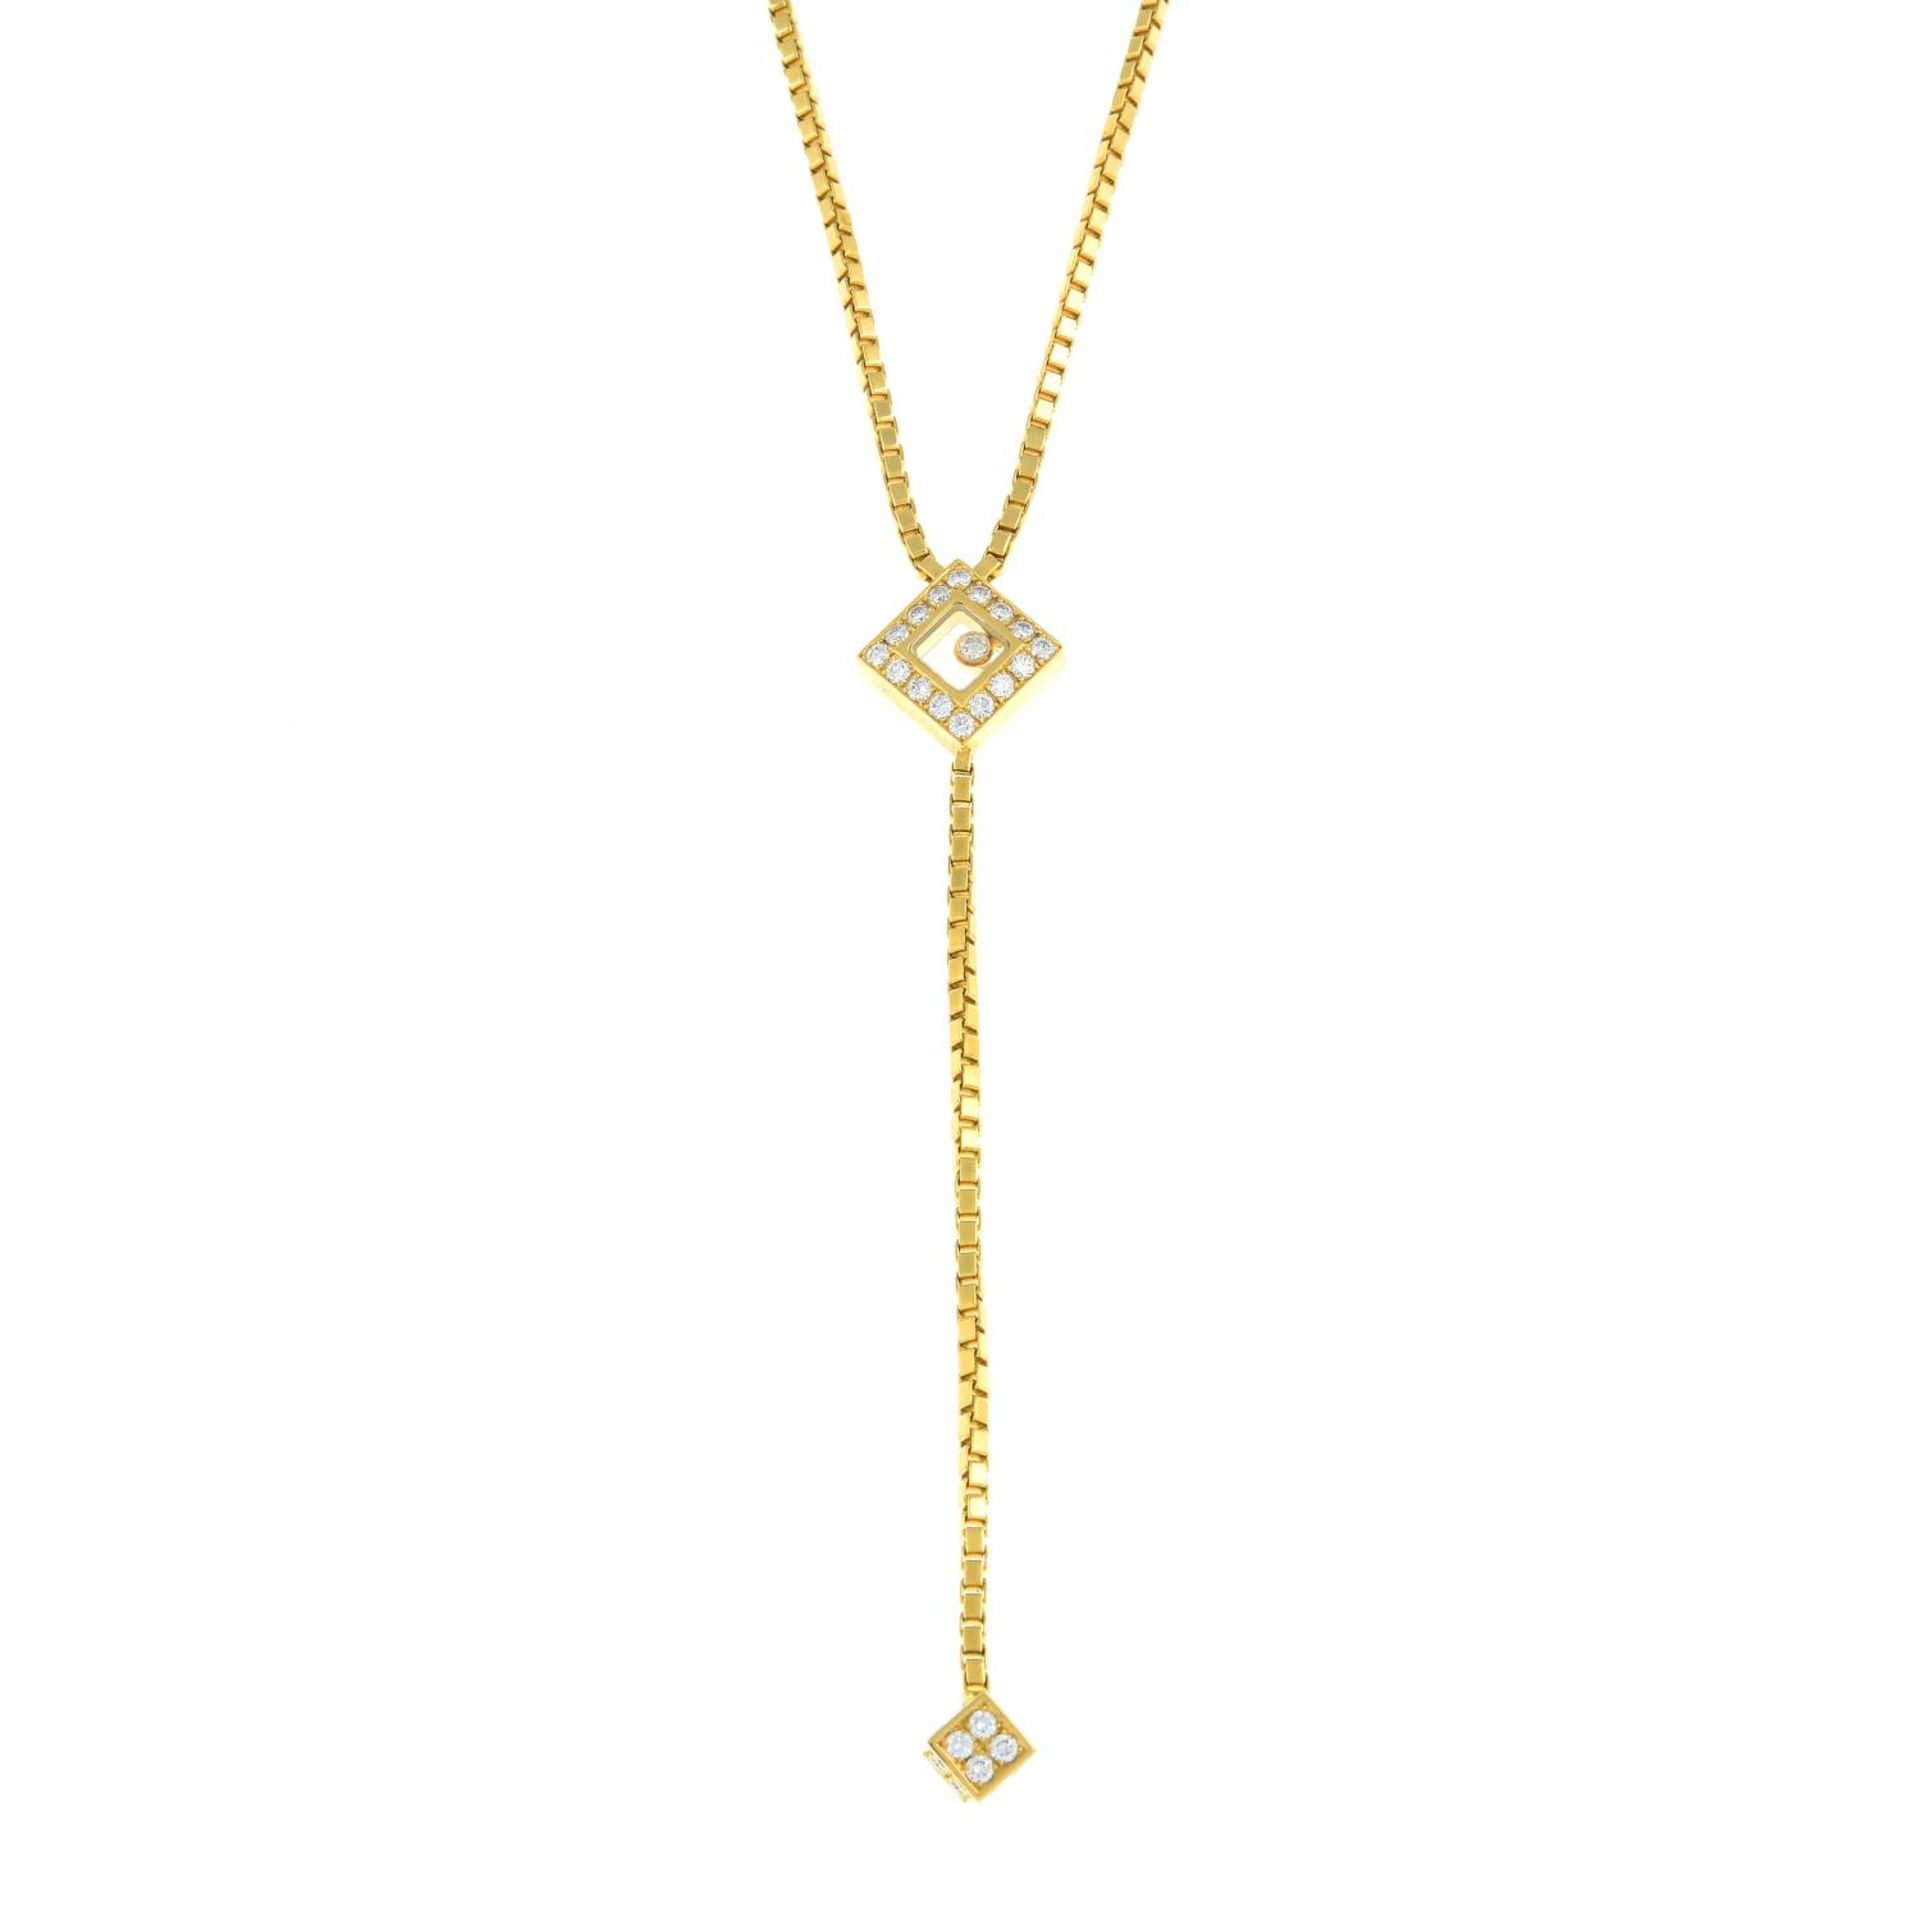 A 'Happy Diamonds' necklace, by Chopard. - Image 3 of 8